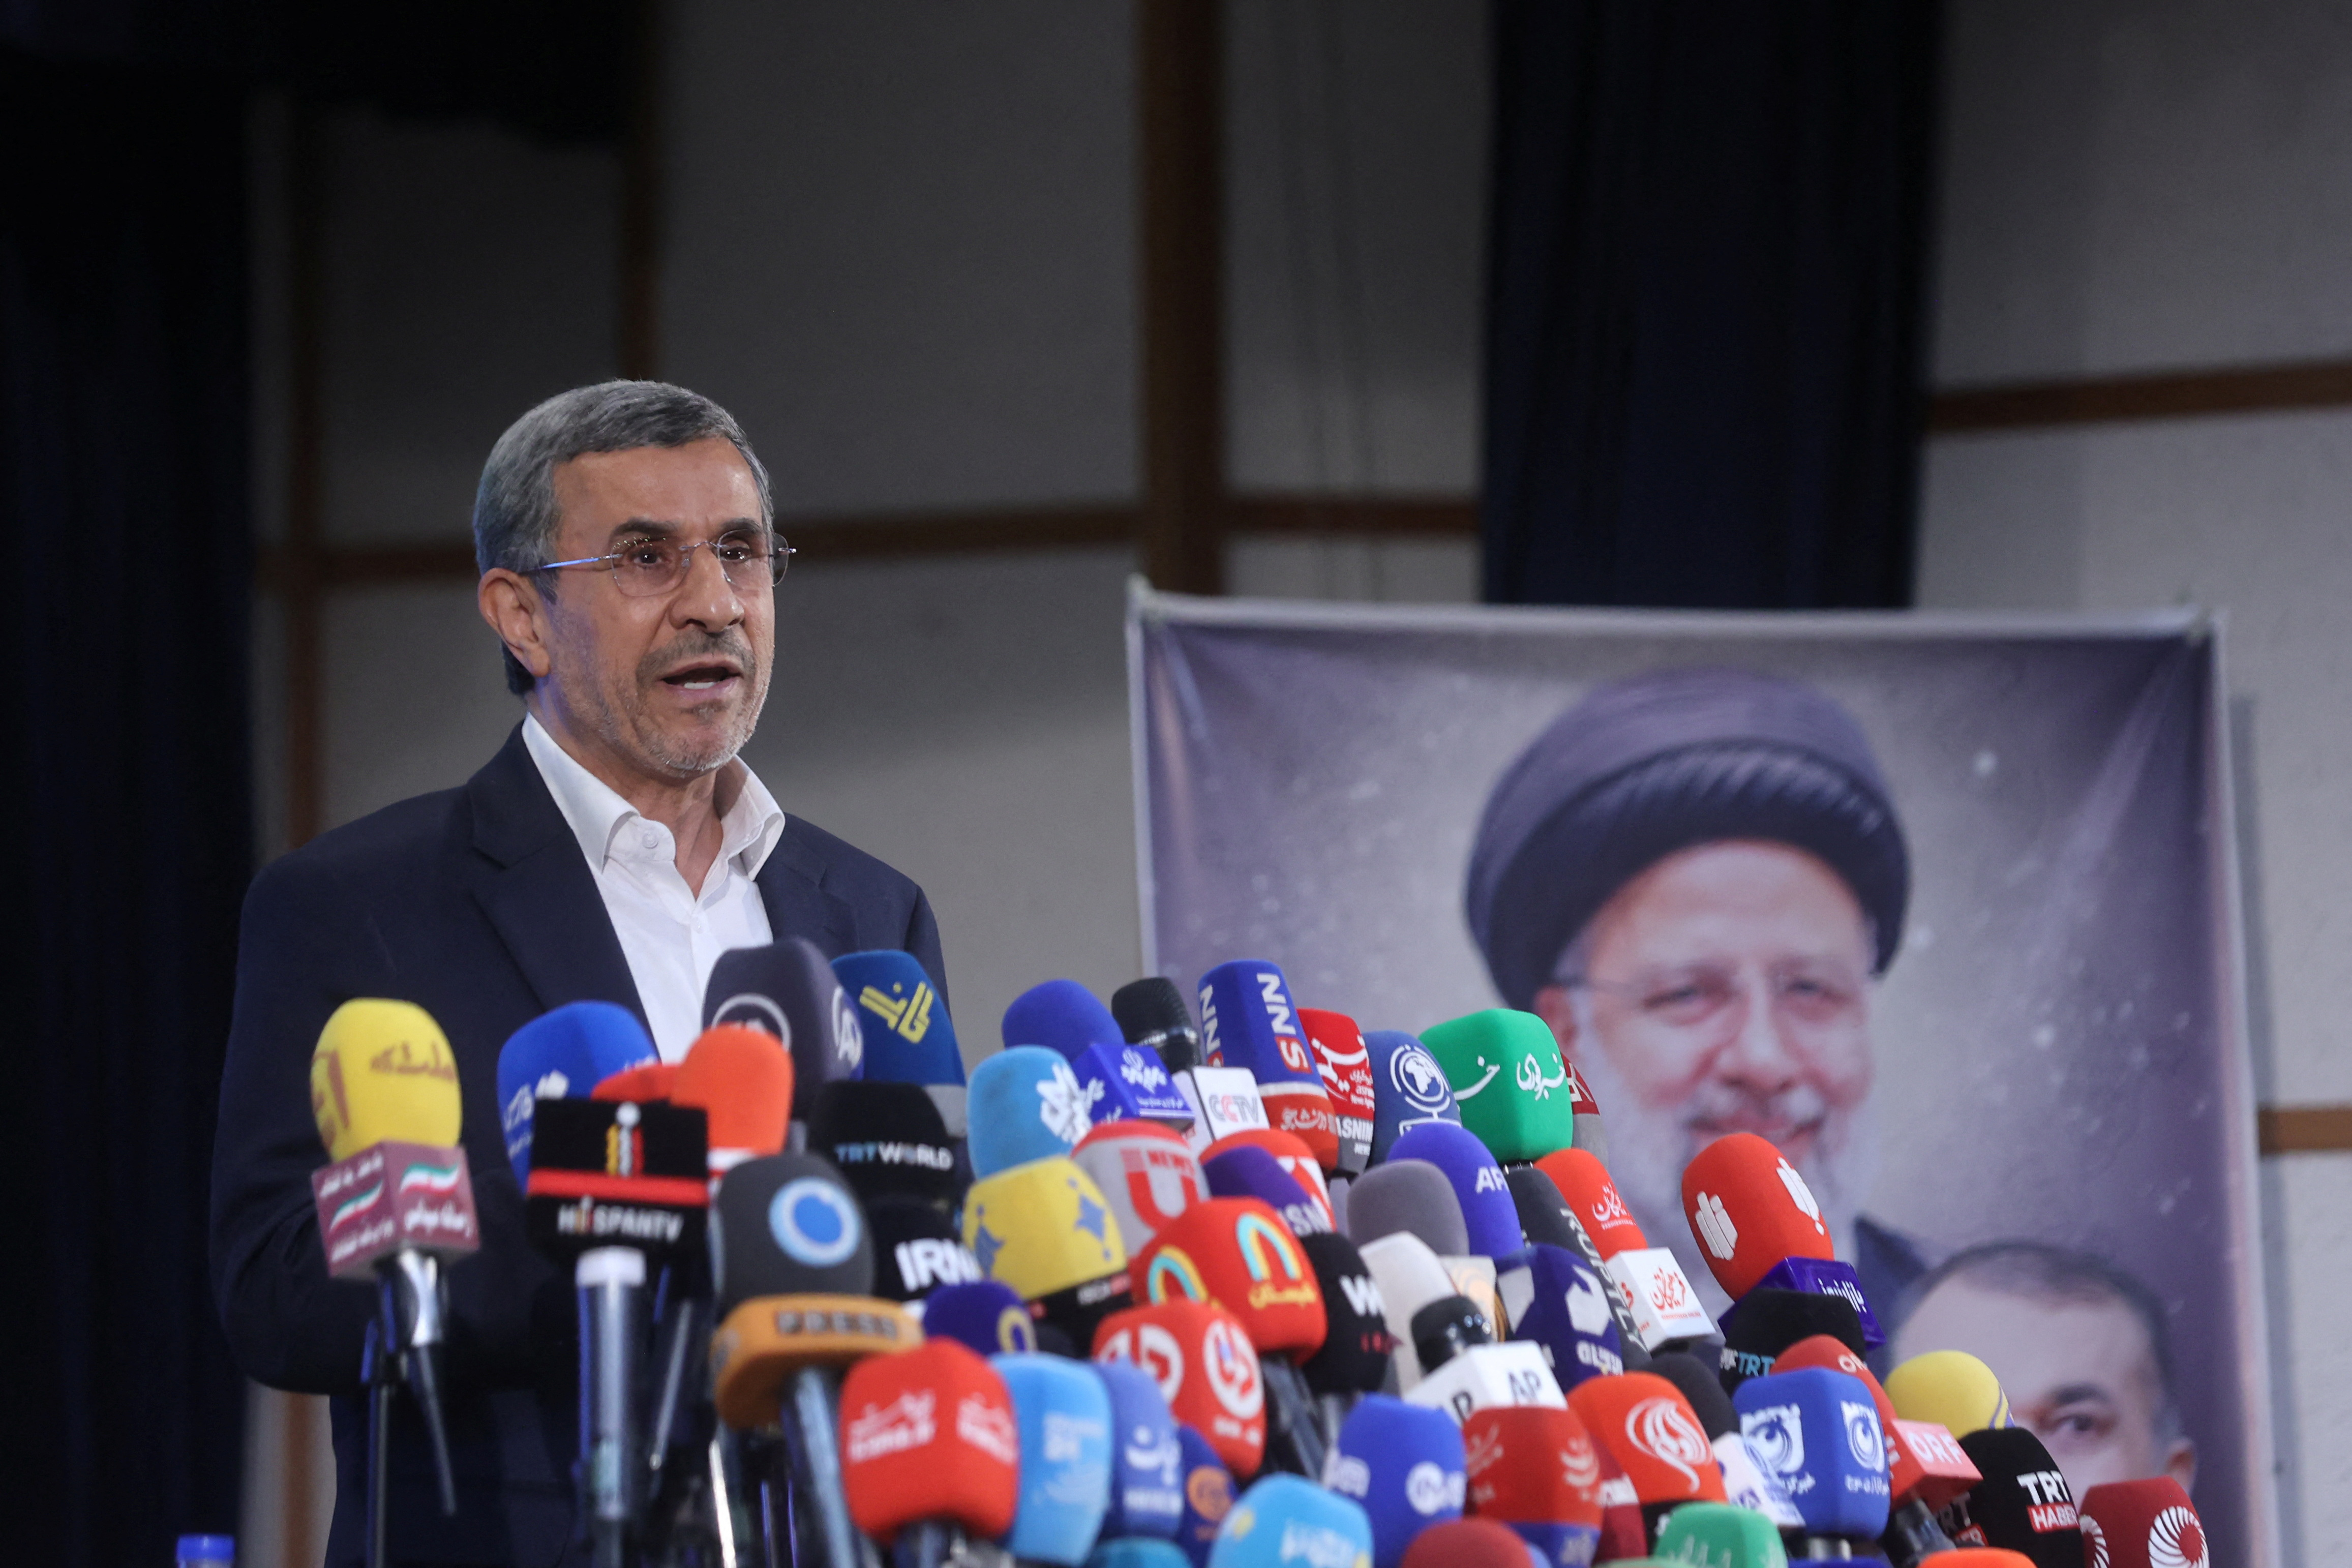 Mahmoud Ahmadinejad former president of Iran, speaks at a press conference after registering as a candidate for the presidential election at the Interior Ministry, in Tehran